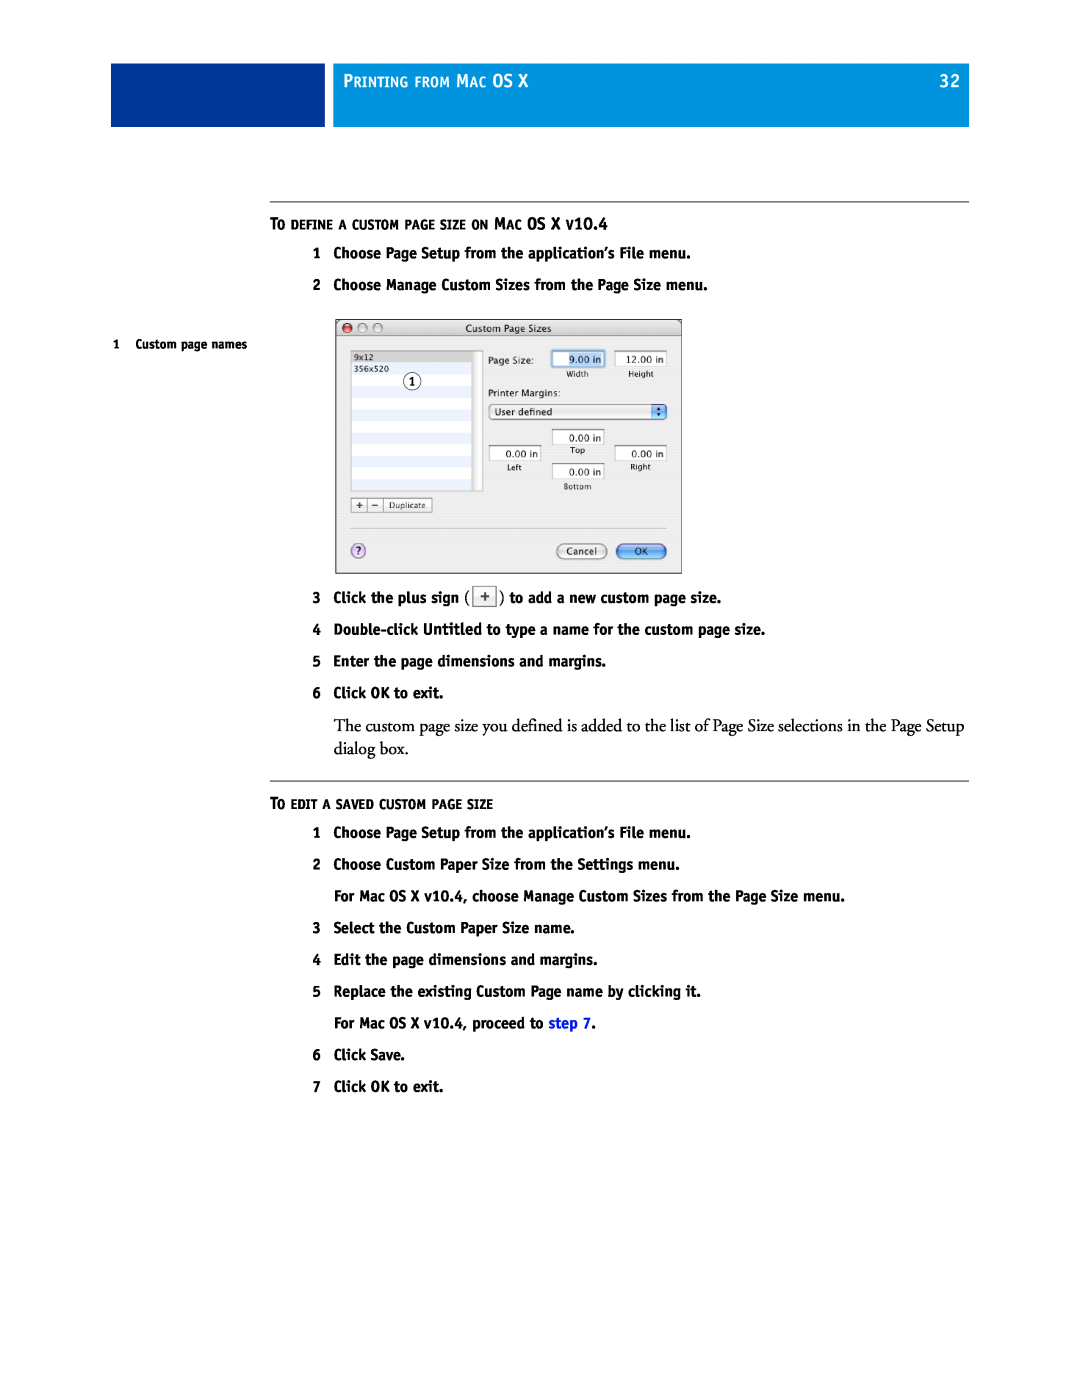 Xerox 45069888 manual Printing From Mac Os, To Define A Custom Page Size On Mac Os X, To Edit A Saved Custom Page Size 